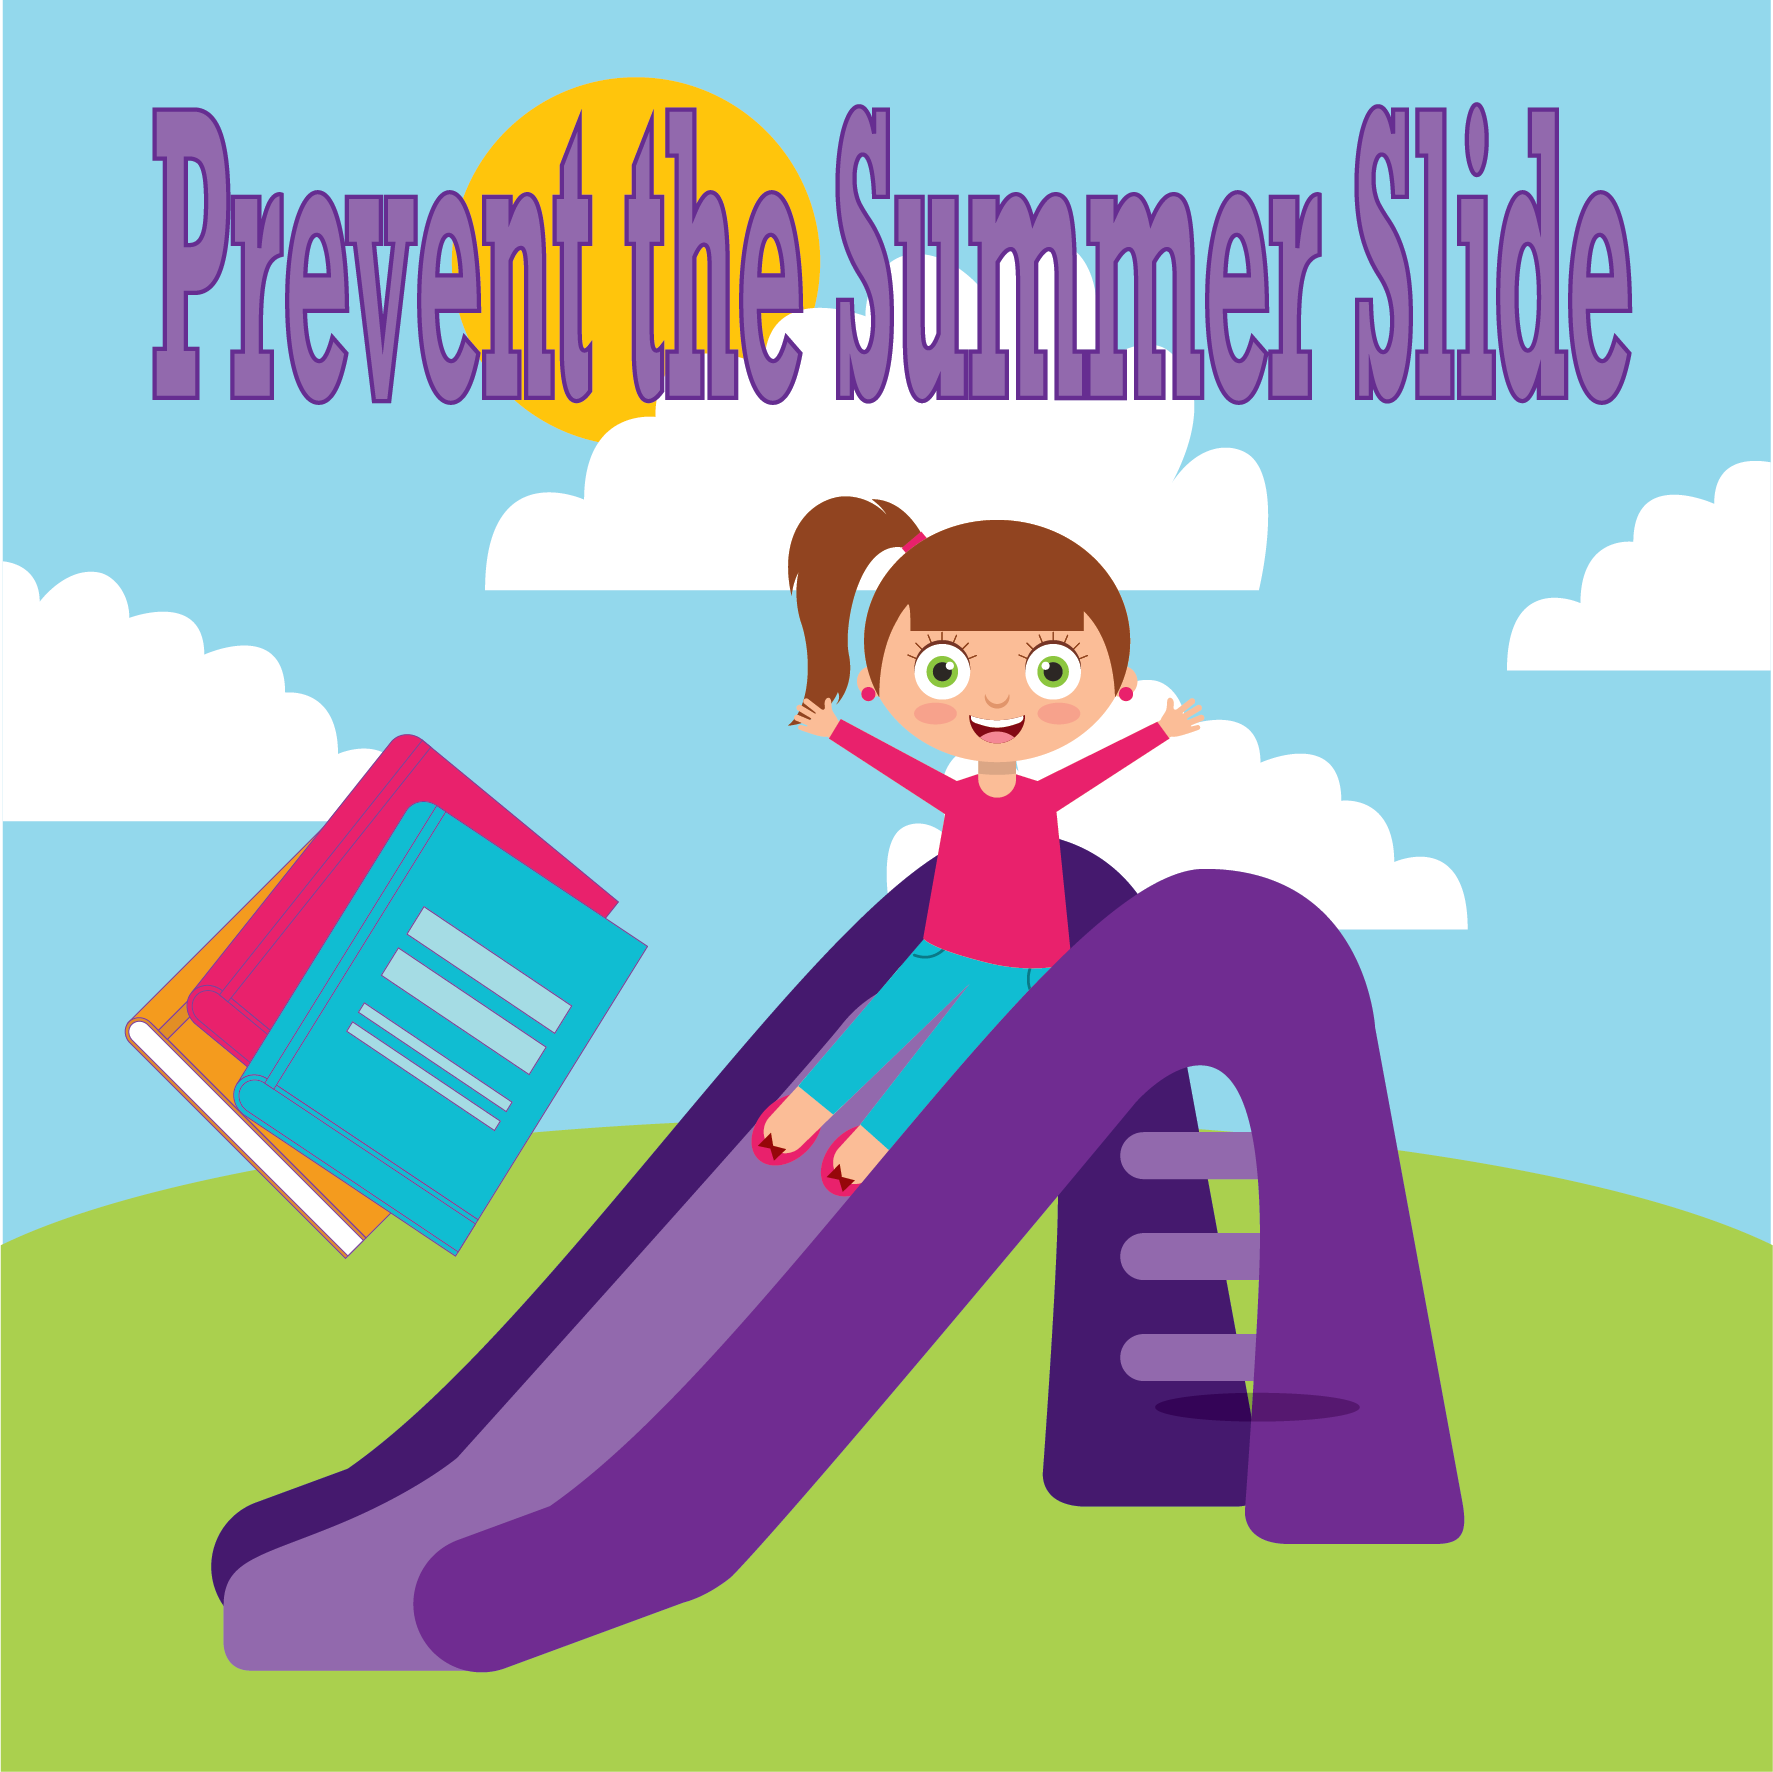 Image of a child sliding down a purple slide labeled with the words "Prevent the Summer Slide."